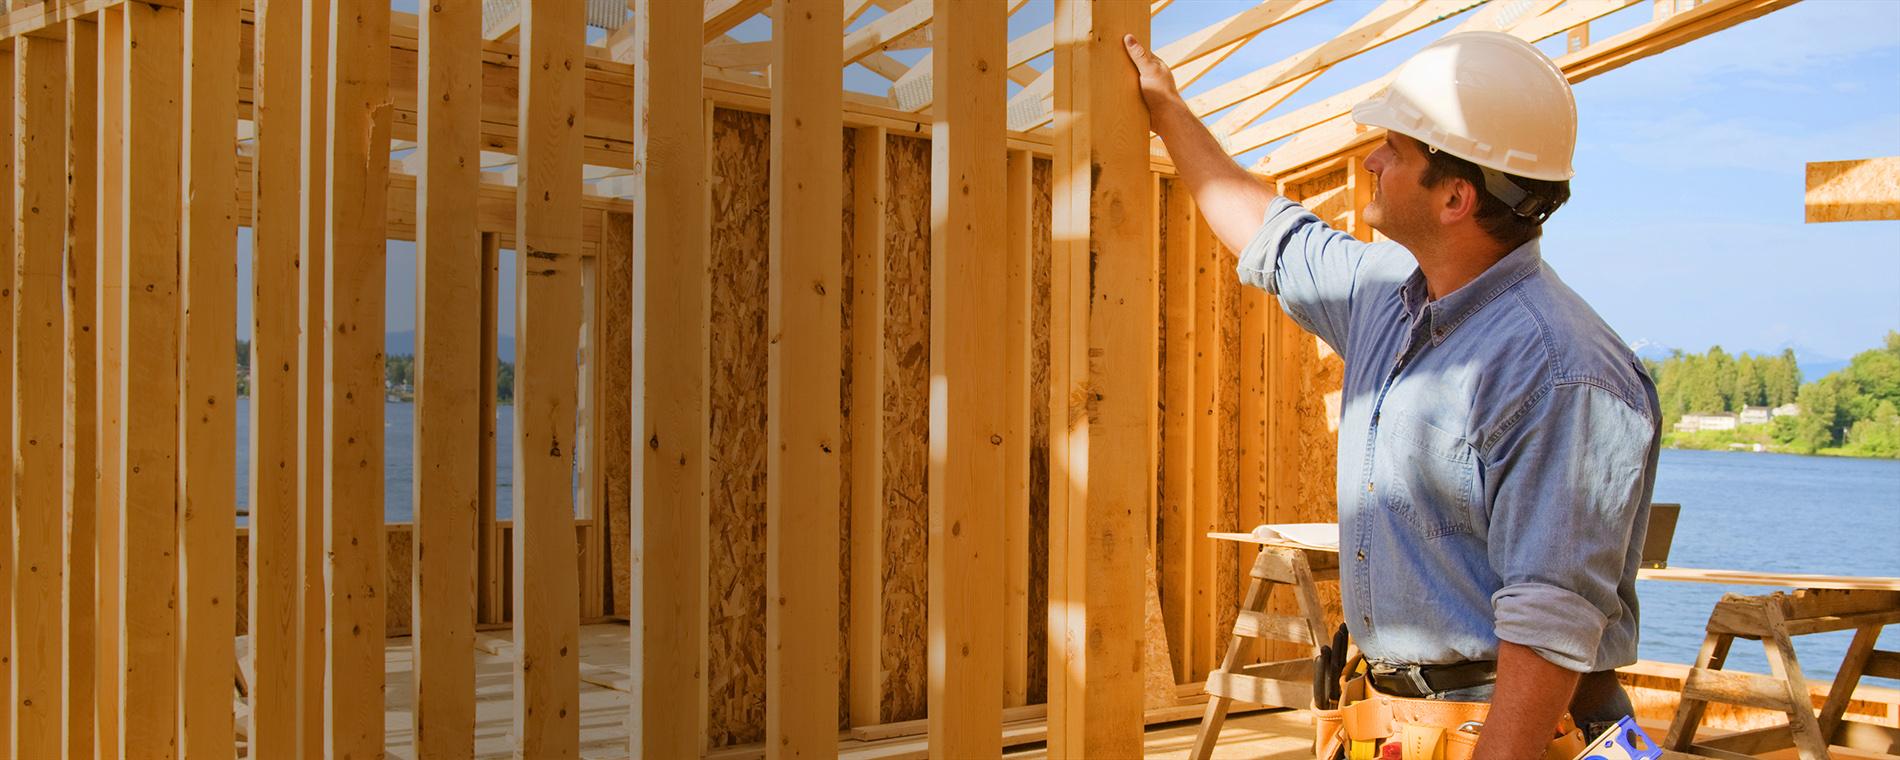 Finding a good contractor can be easy if you know how